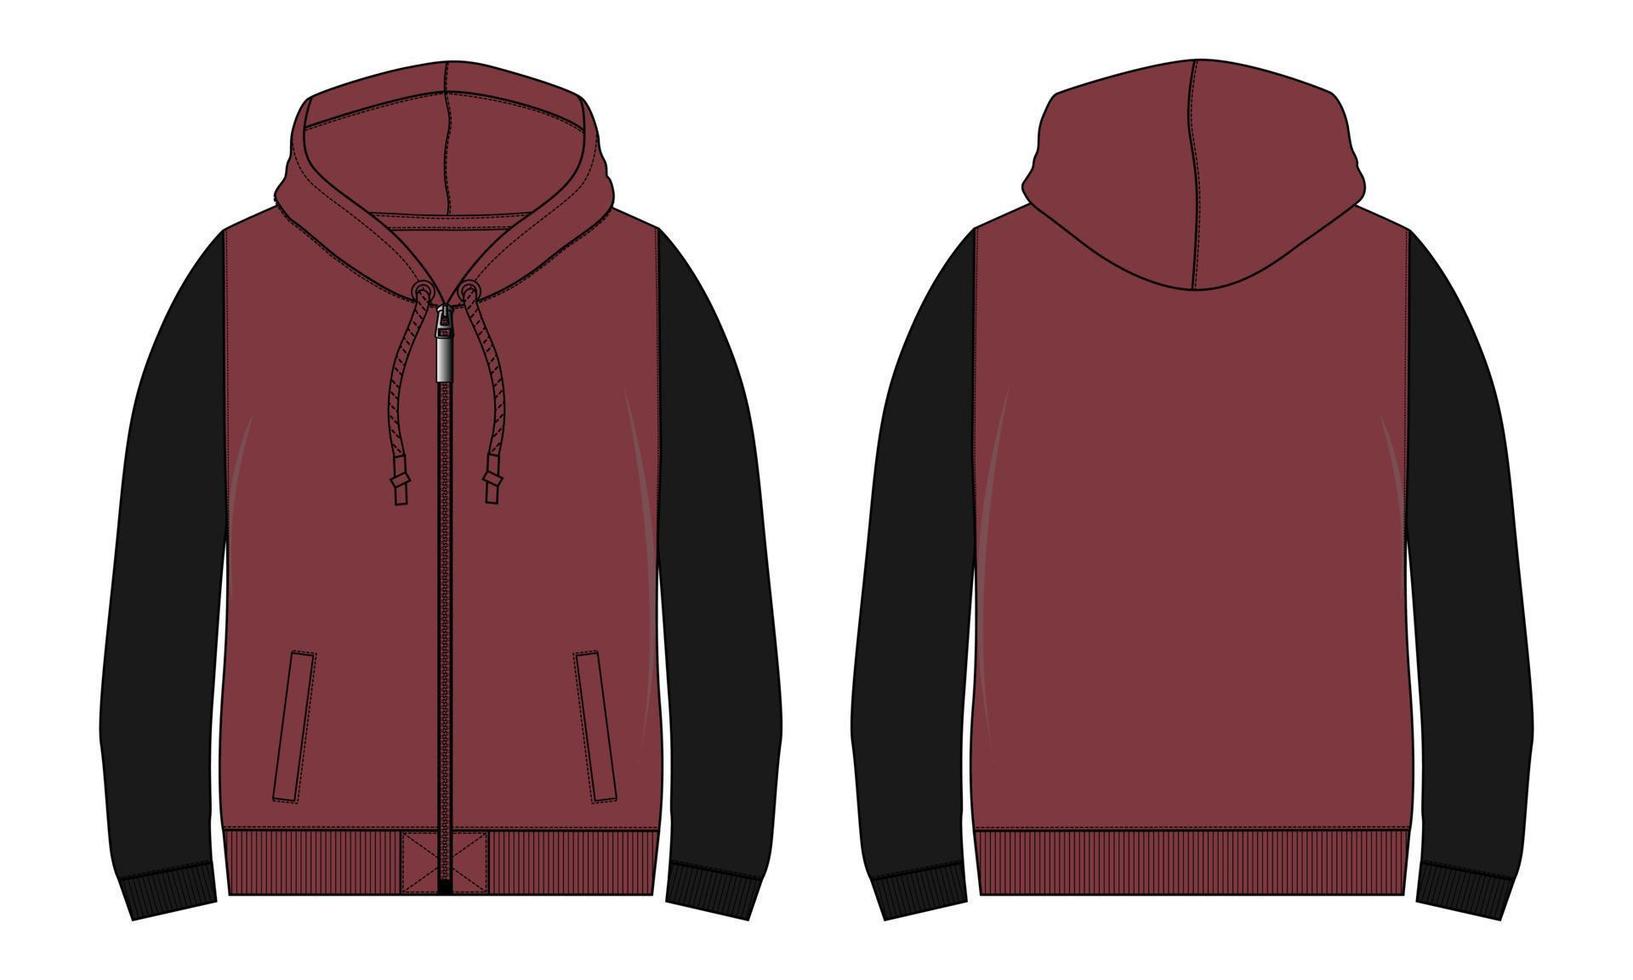 Long Sleeve Hoodie technical fashion flat sketch vector illustration template front and back views.